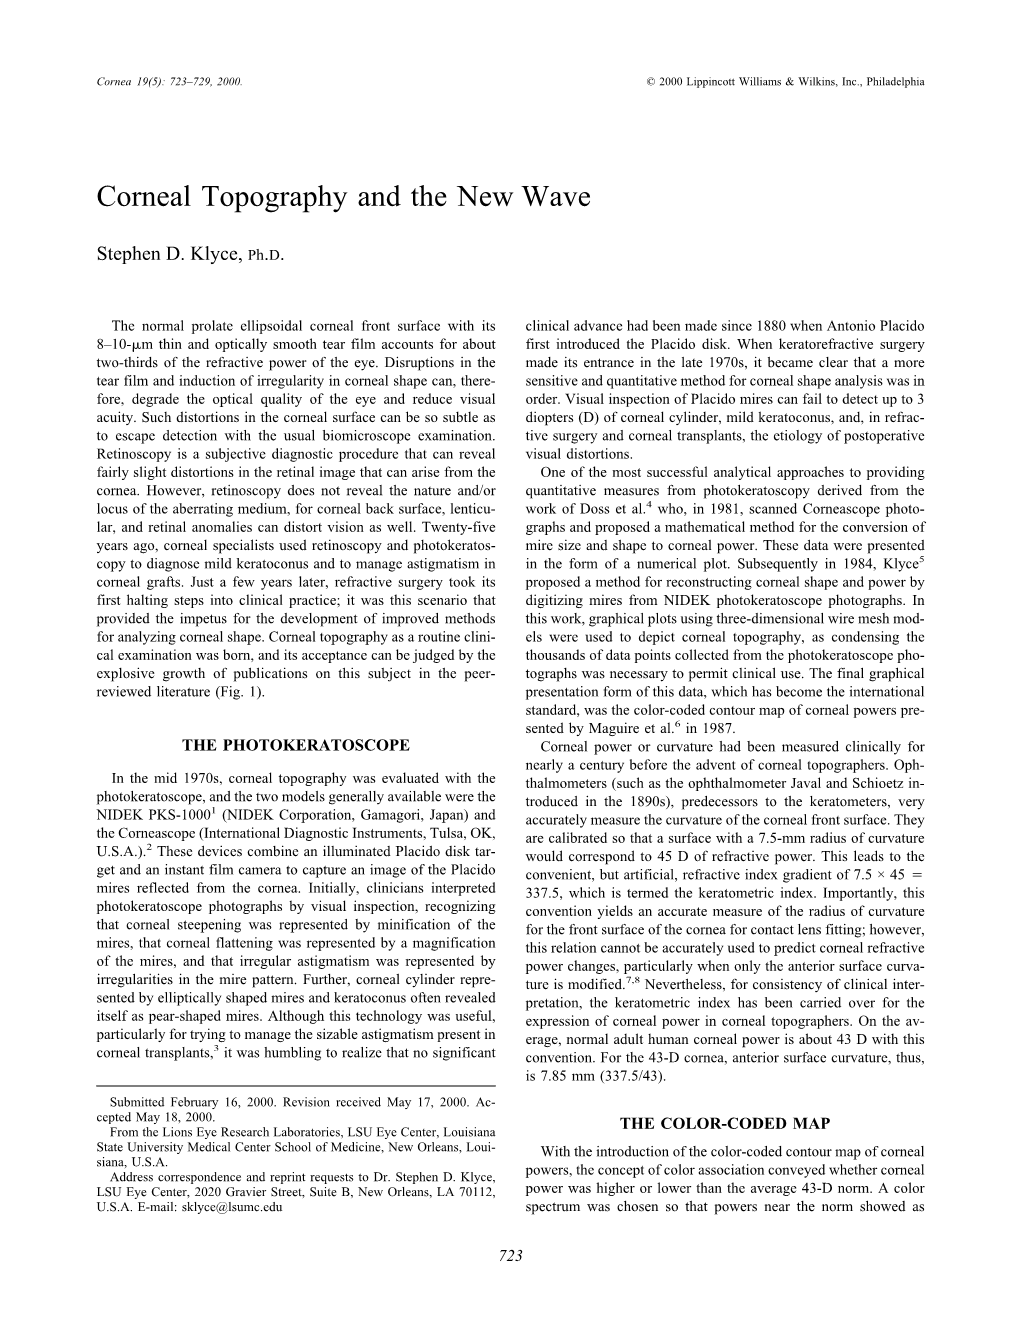 Corneal Topography and the New Wave